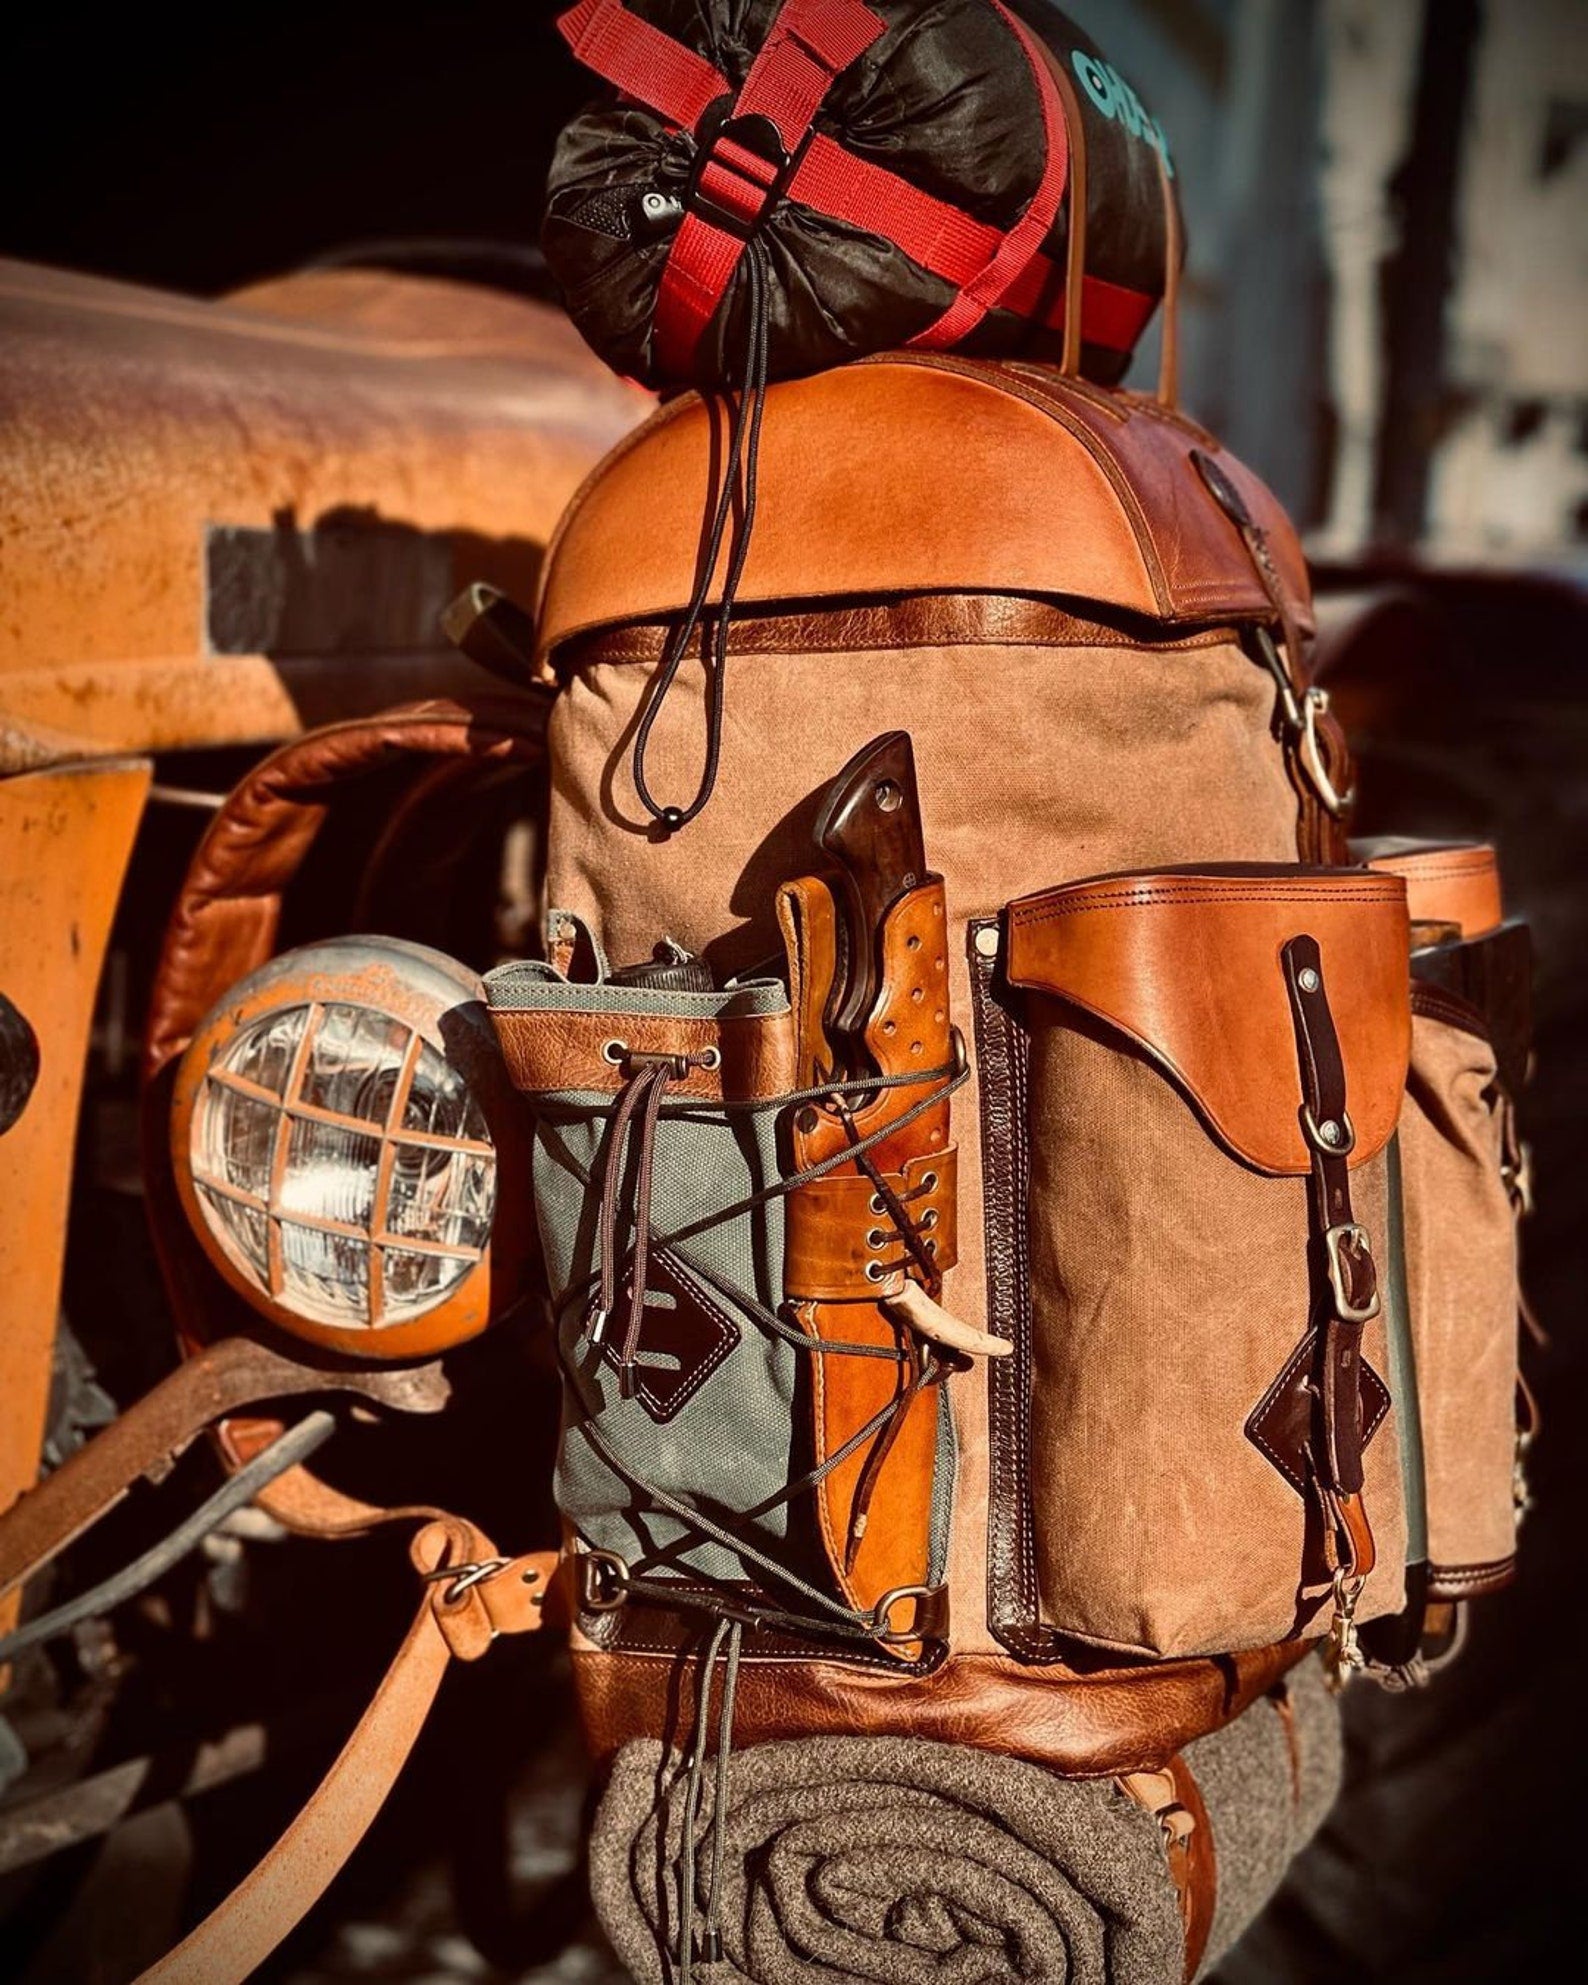 For Shane | Handmade Leather, Waxed Backpack for Travel, Camping, Hunting, Bushcraft, Hiking | 45 Liter | Survival | Personalization bushcraft - camping - hiking backpack 99percenthandmade   